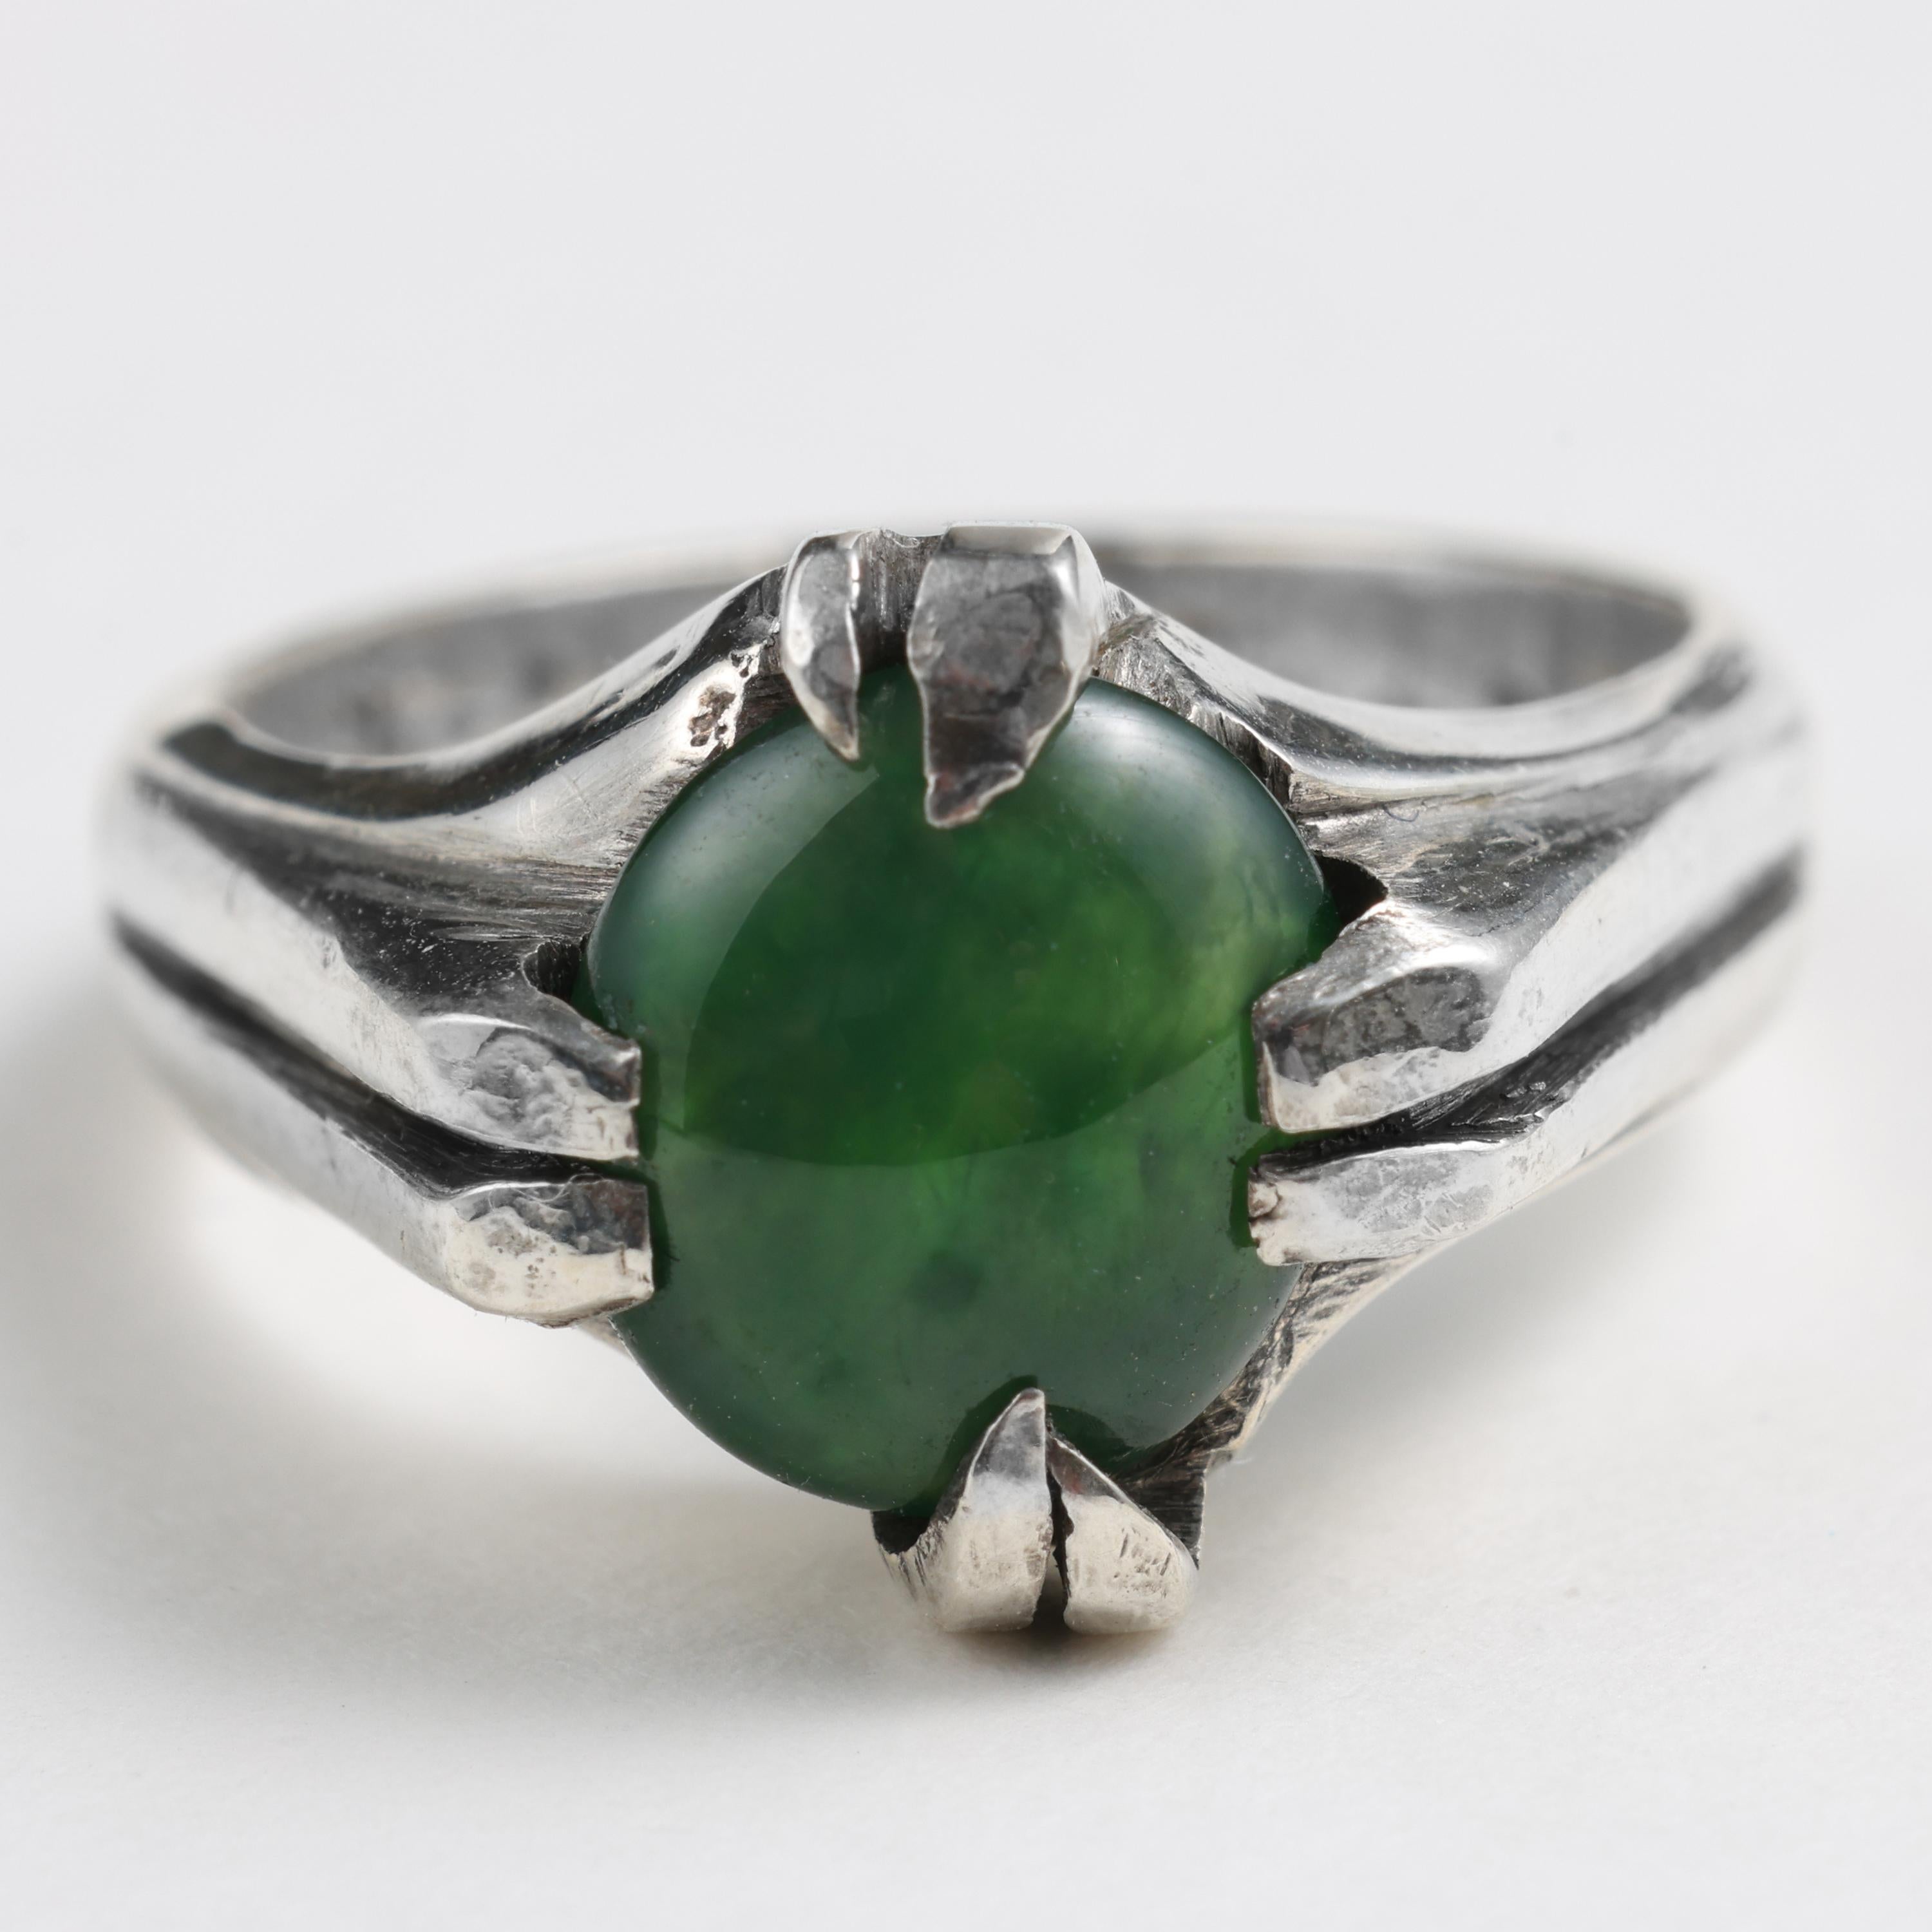 Omphacite Jade Ring in Silver, Certified Untreated Fei Cui 4